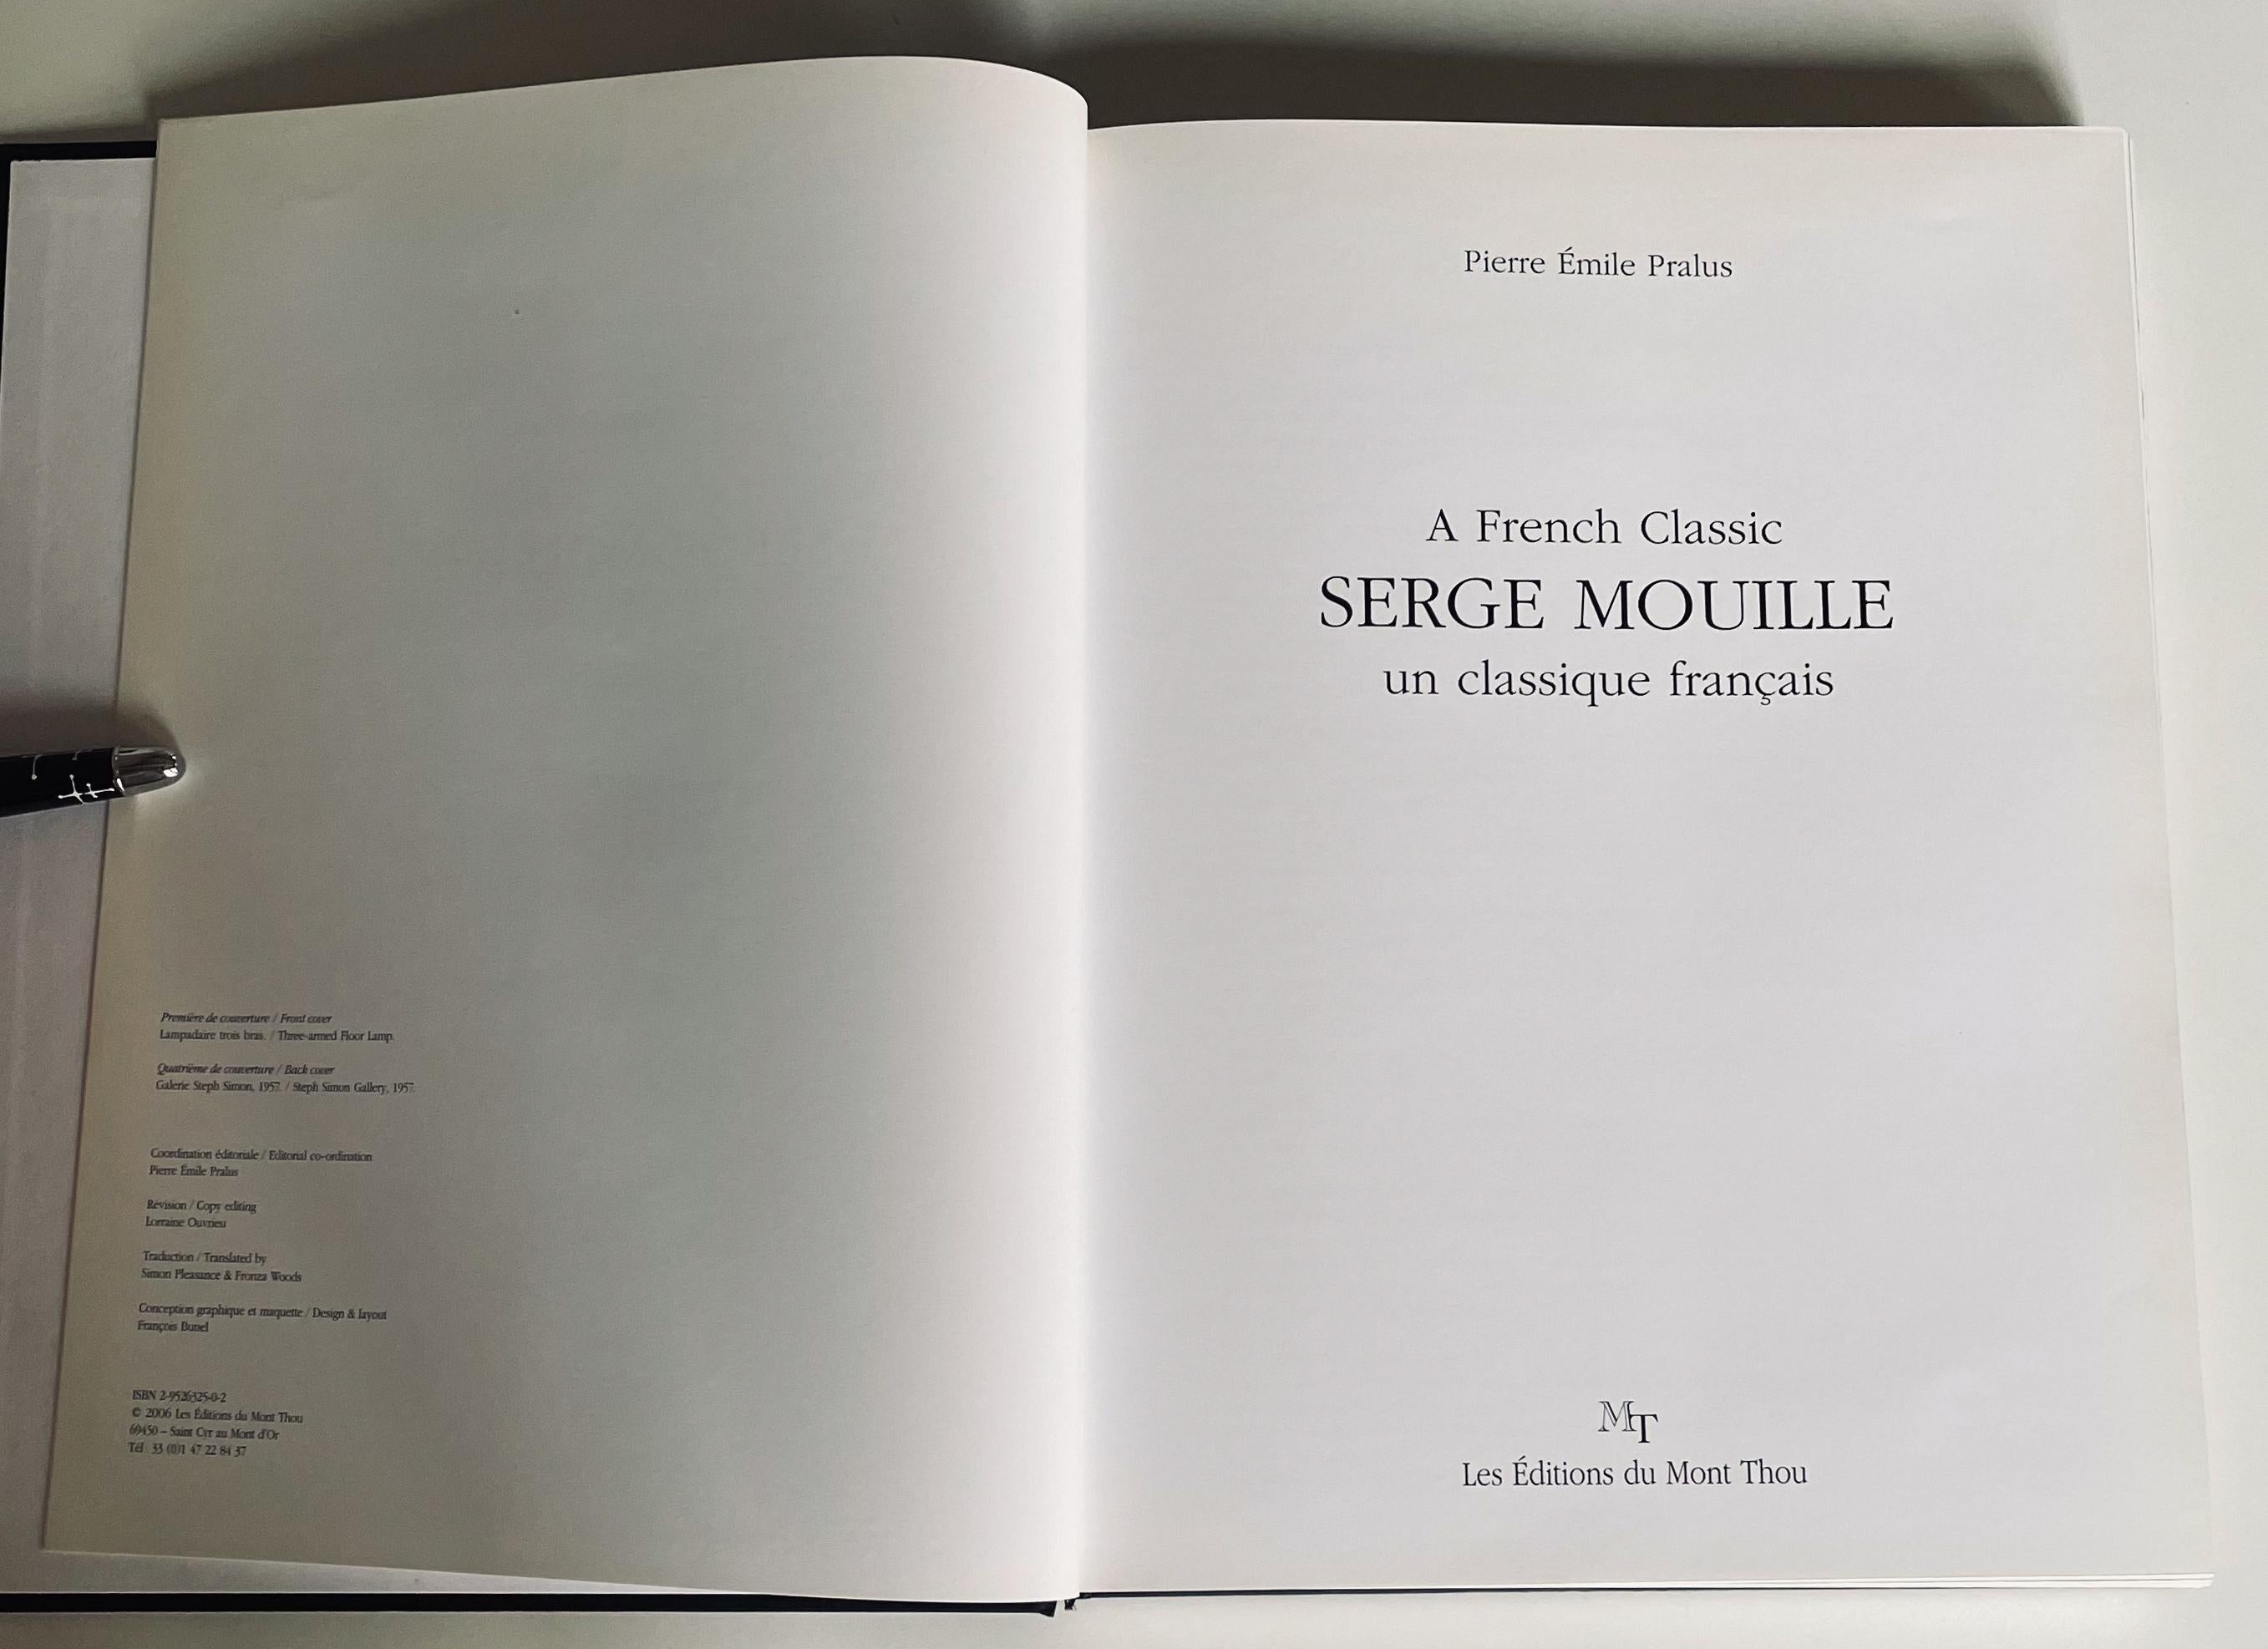 Mid-Century Modern Serge Mouille: a French Classic